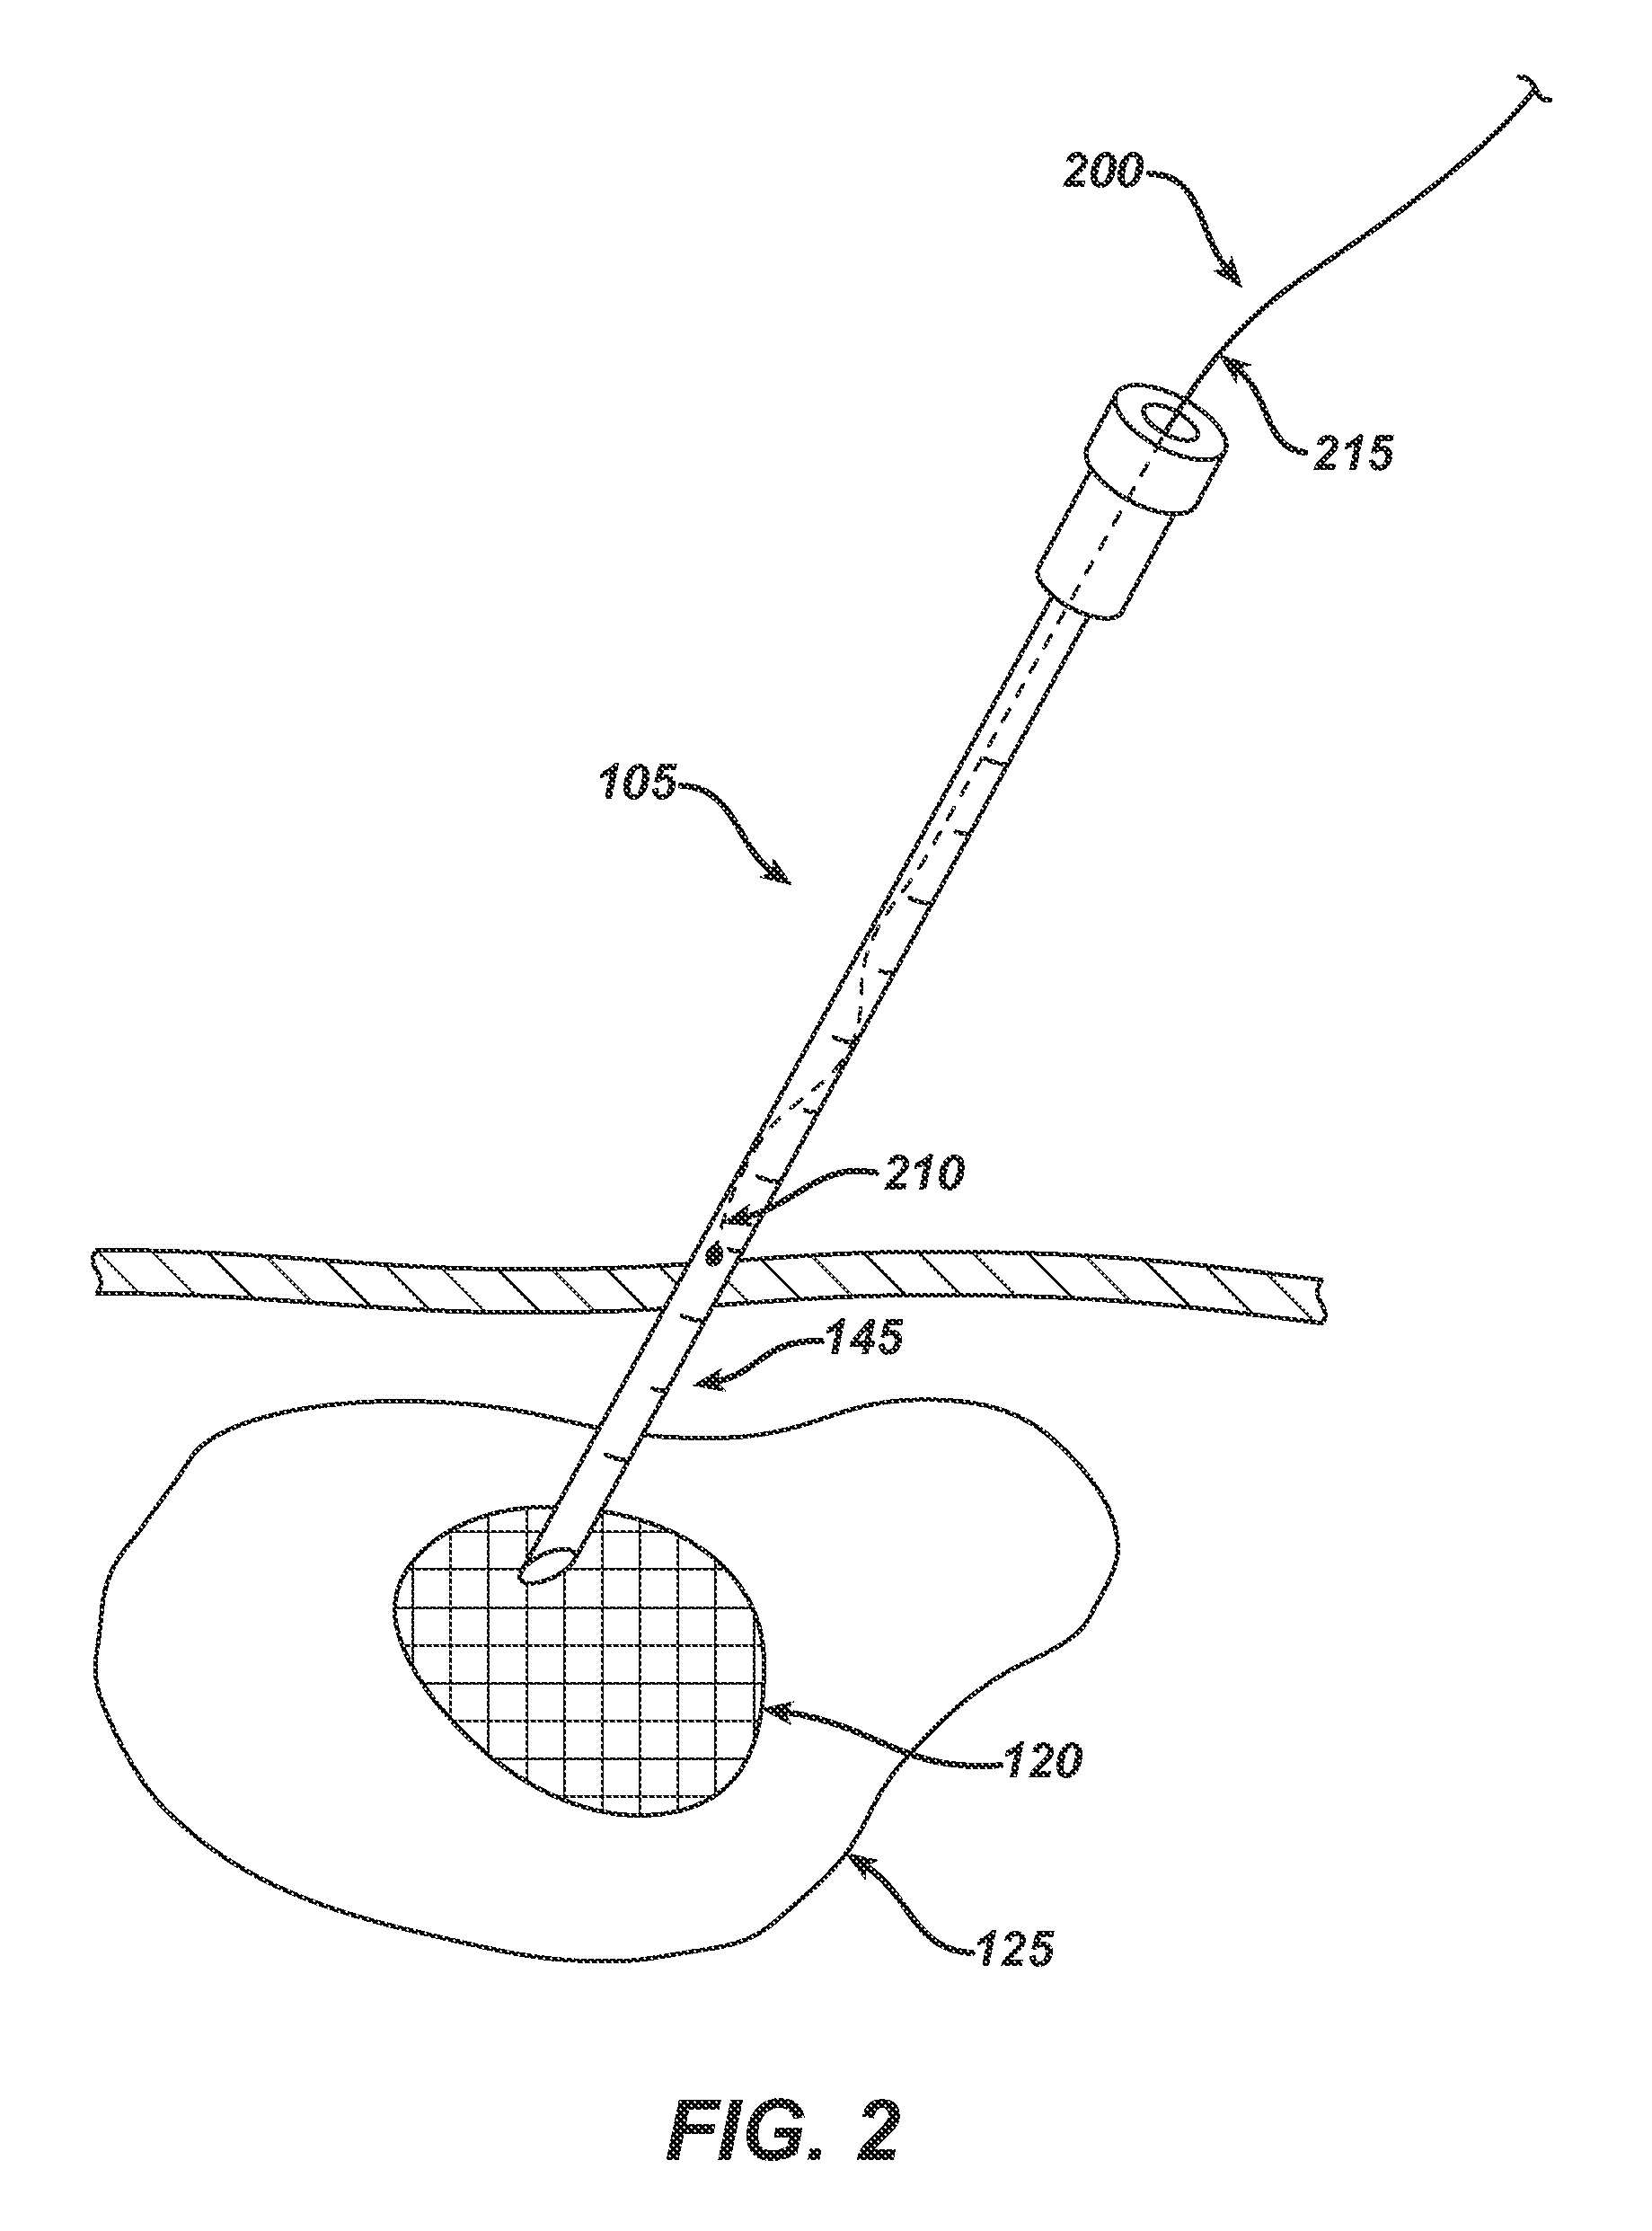 System and Method for Targeted Delivery of Therapeutic Agents to Tissue